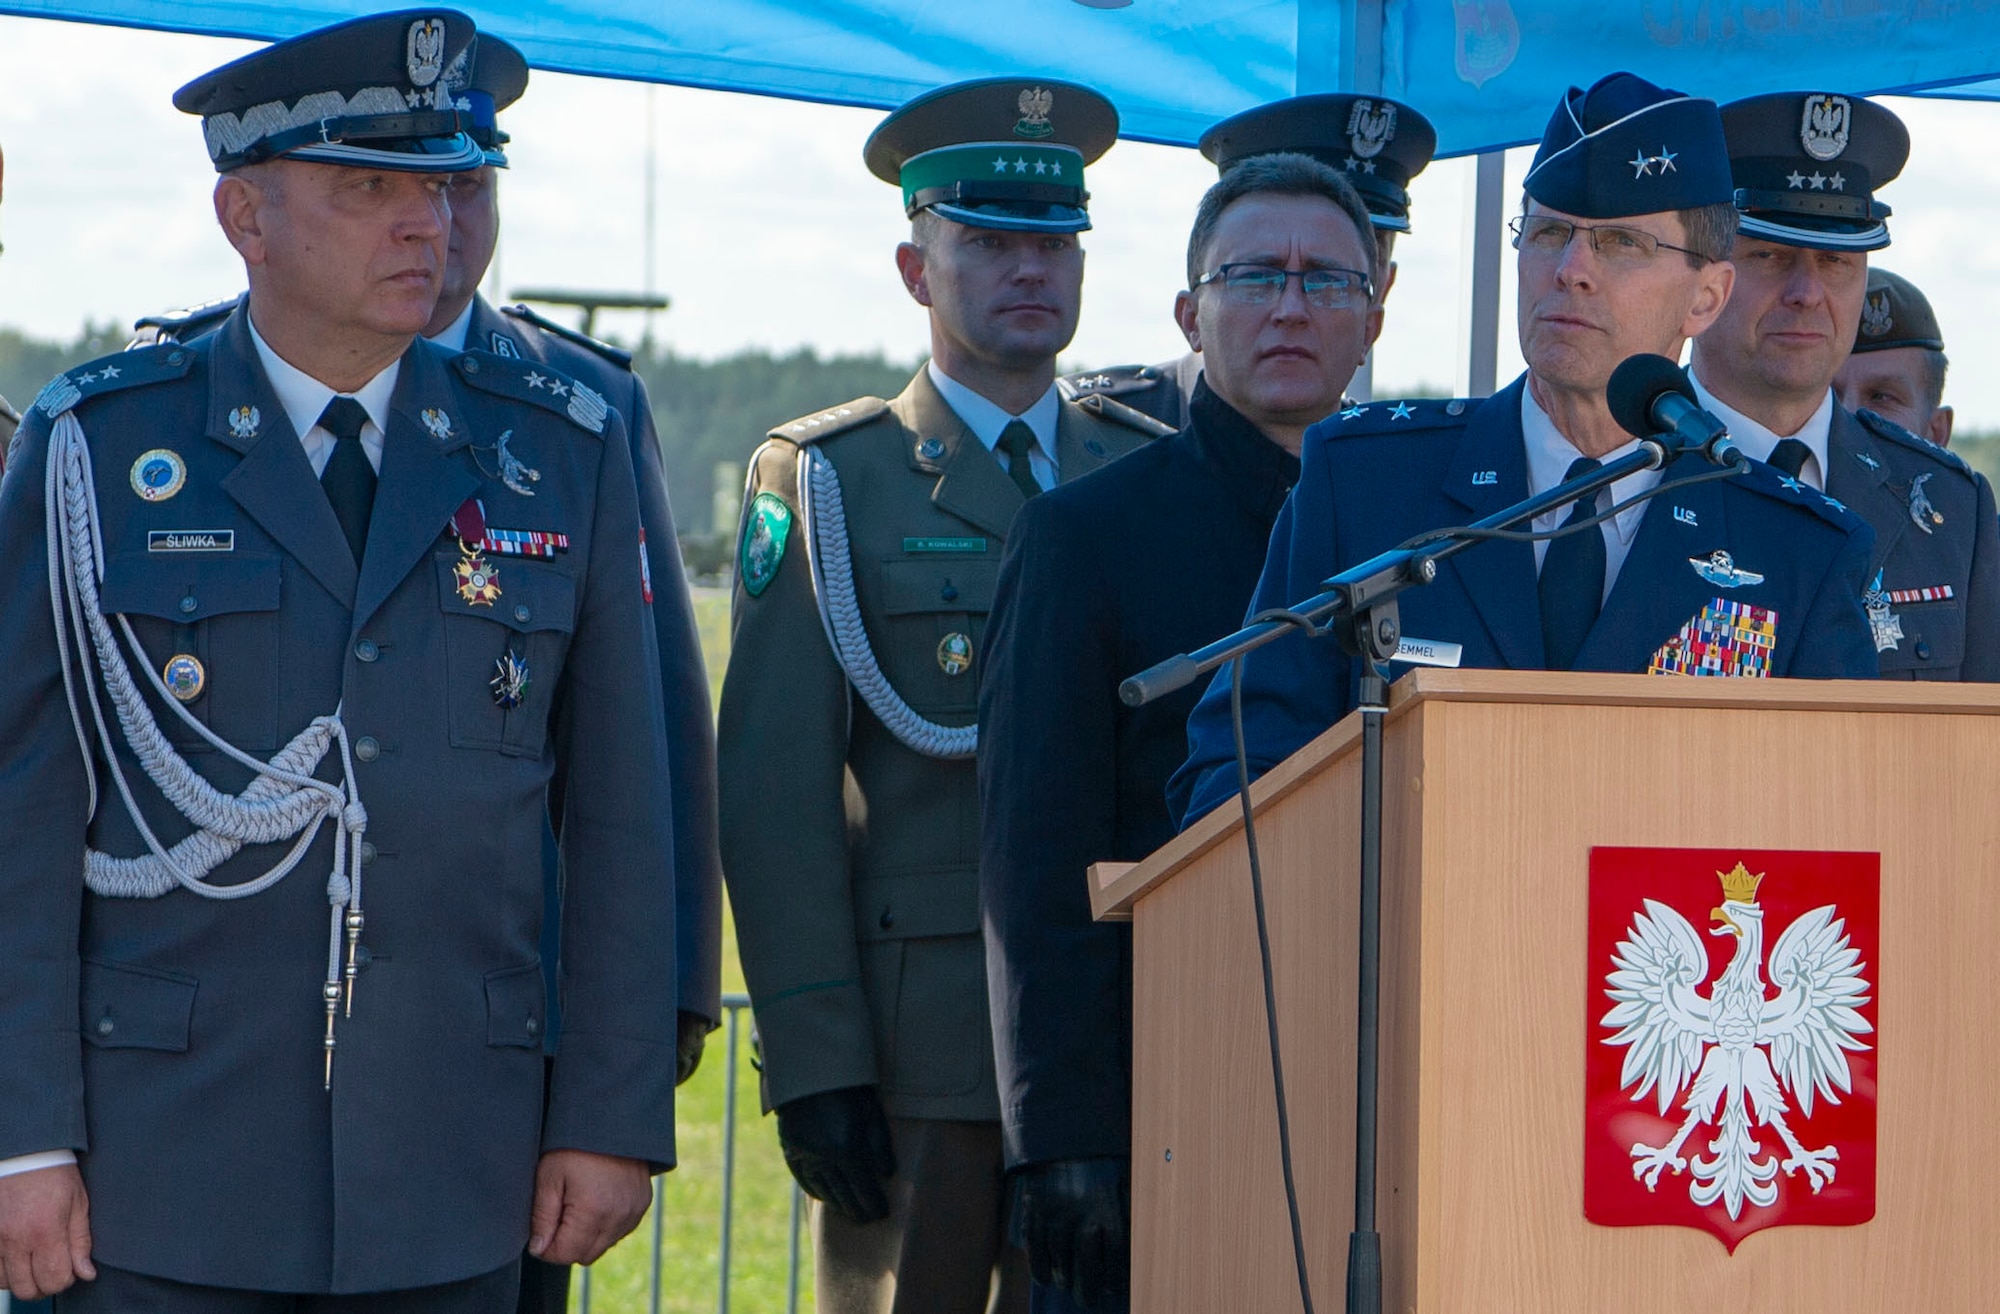 Runway at Łask Air Base, Poland reopens, increases U.S. and Polish military abilities in region